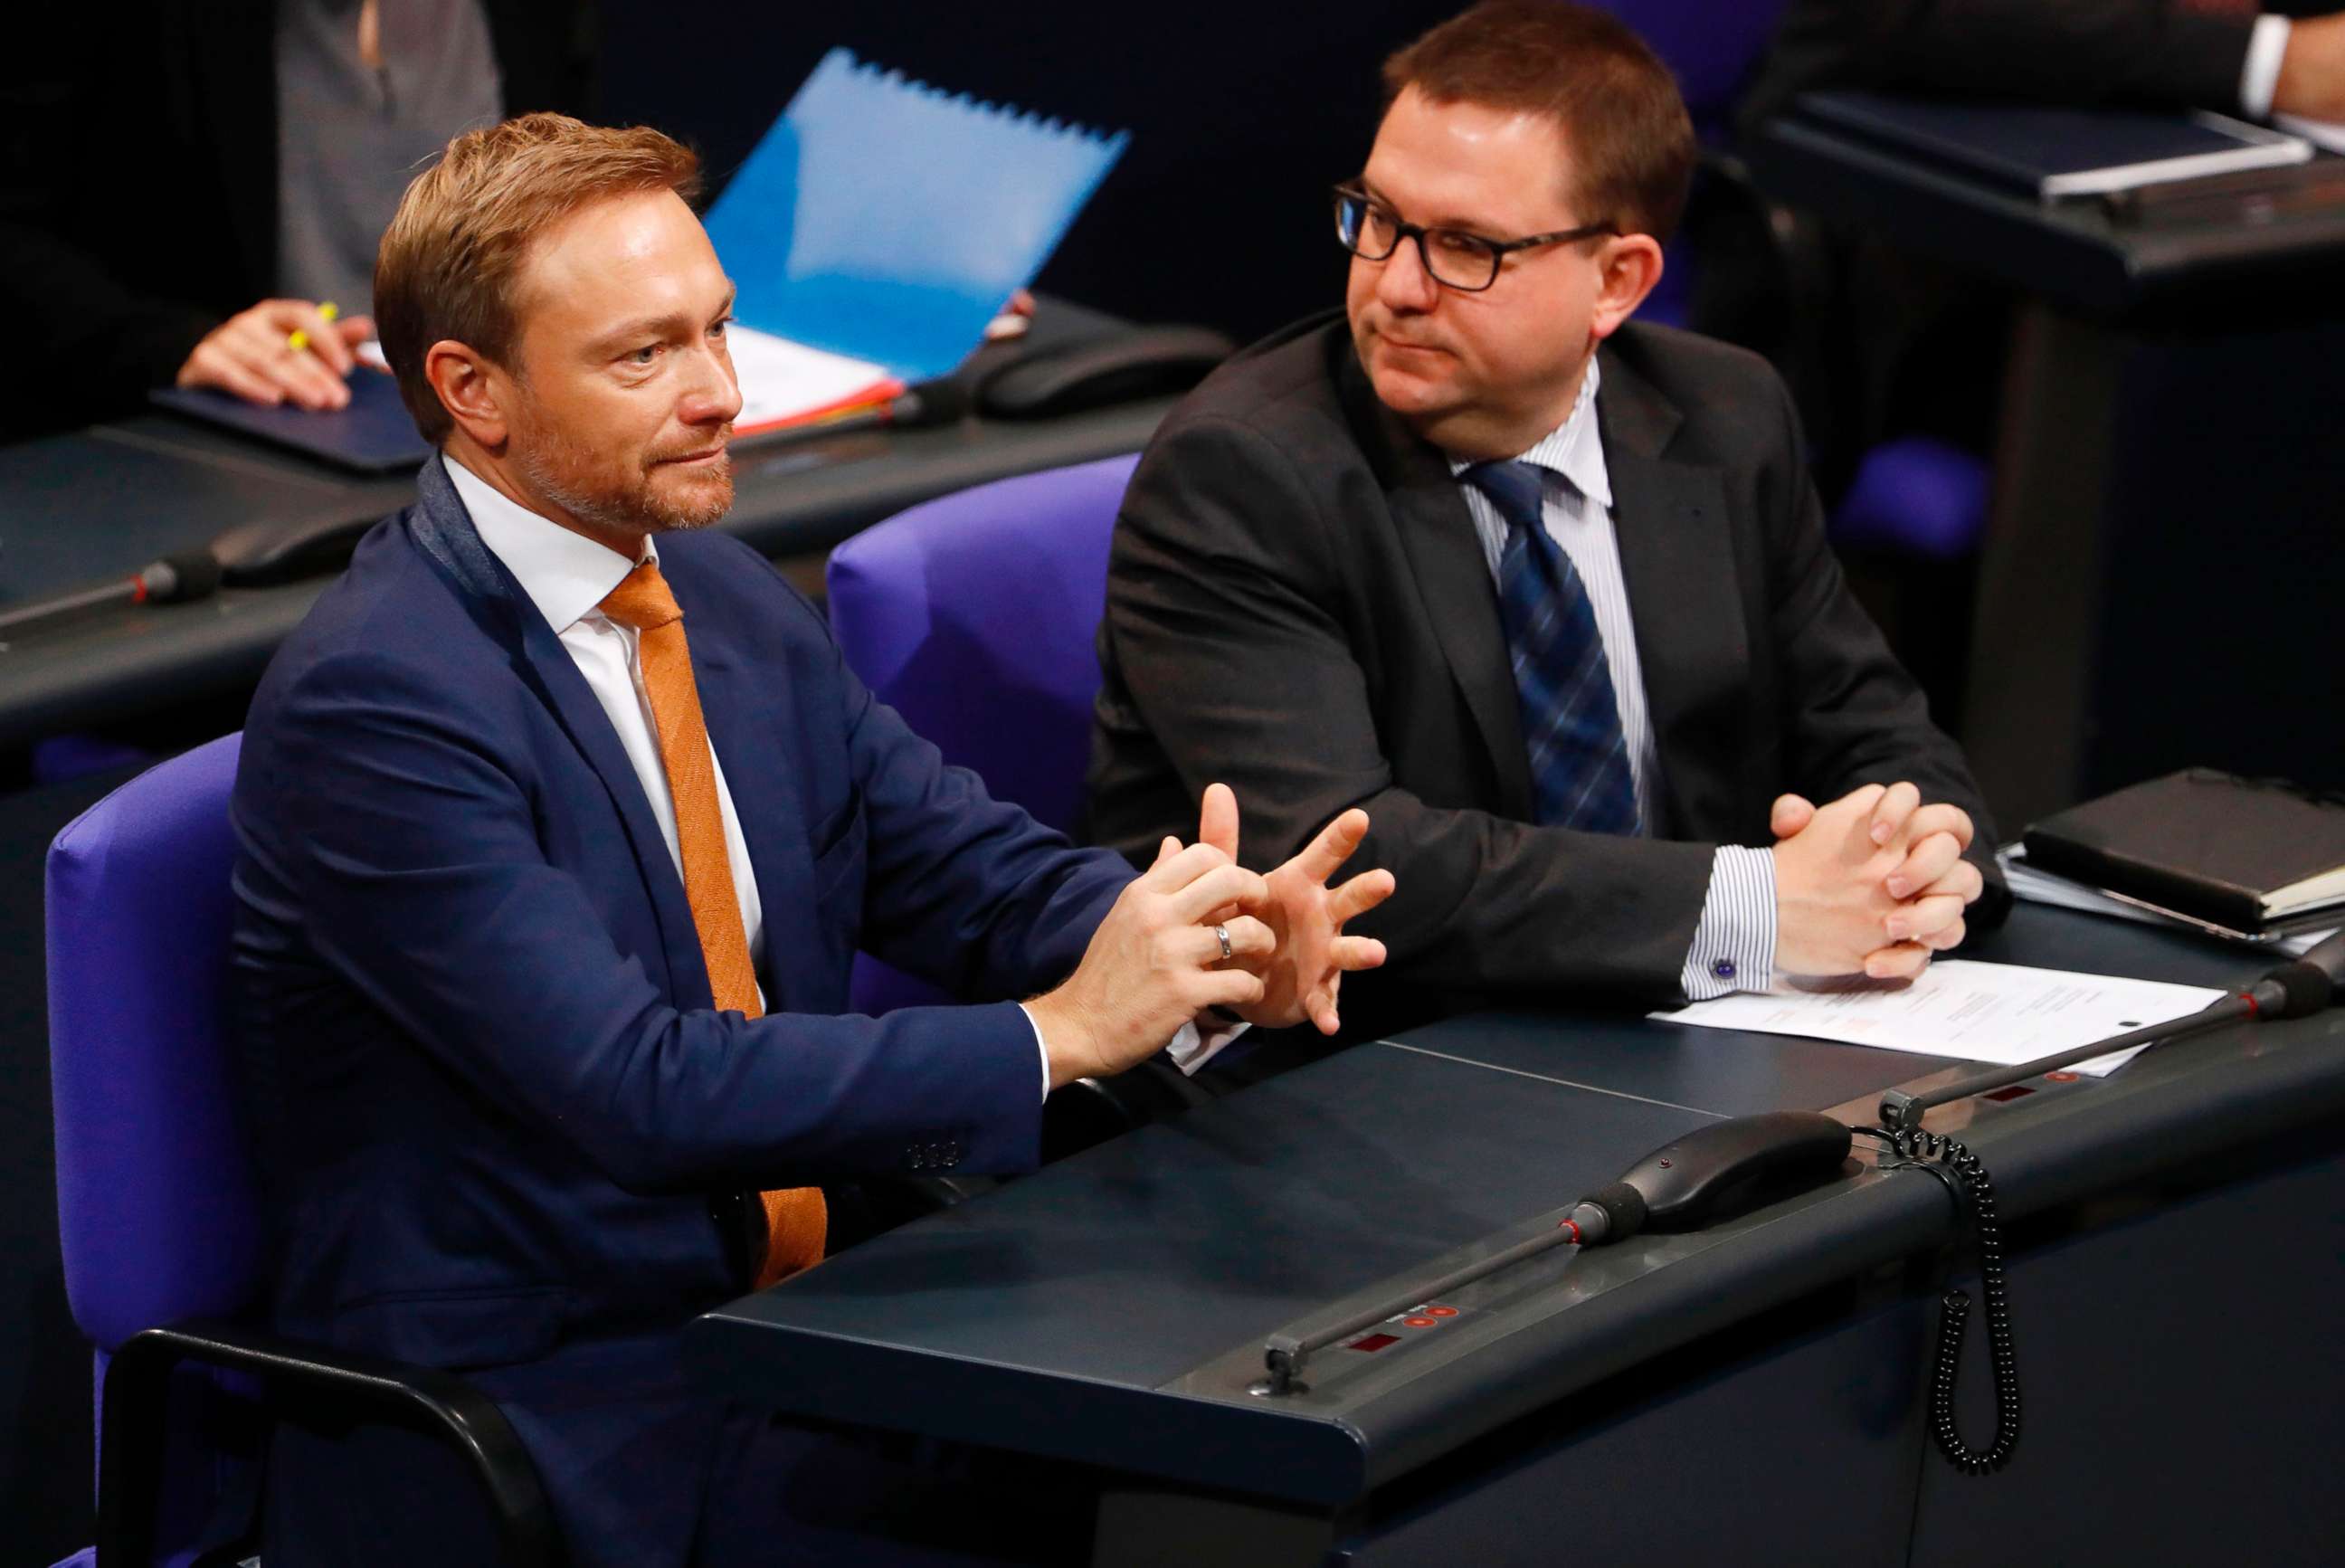 PHOTO: The leader of the Free democratic FDP party Christian Lindner (L) looks on during a session at the Bundestag lower house of Parliament, Nov. 21, 2017 in Berlin.